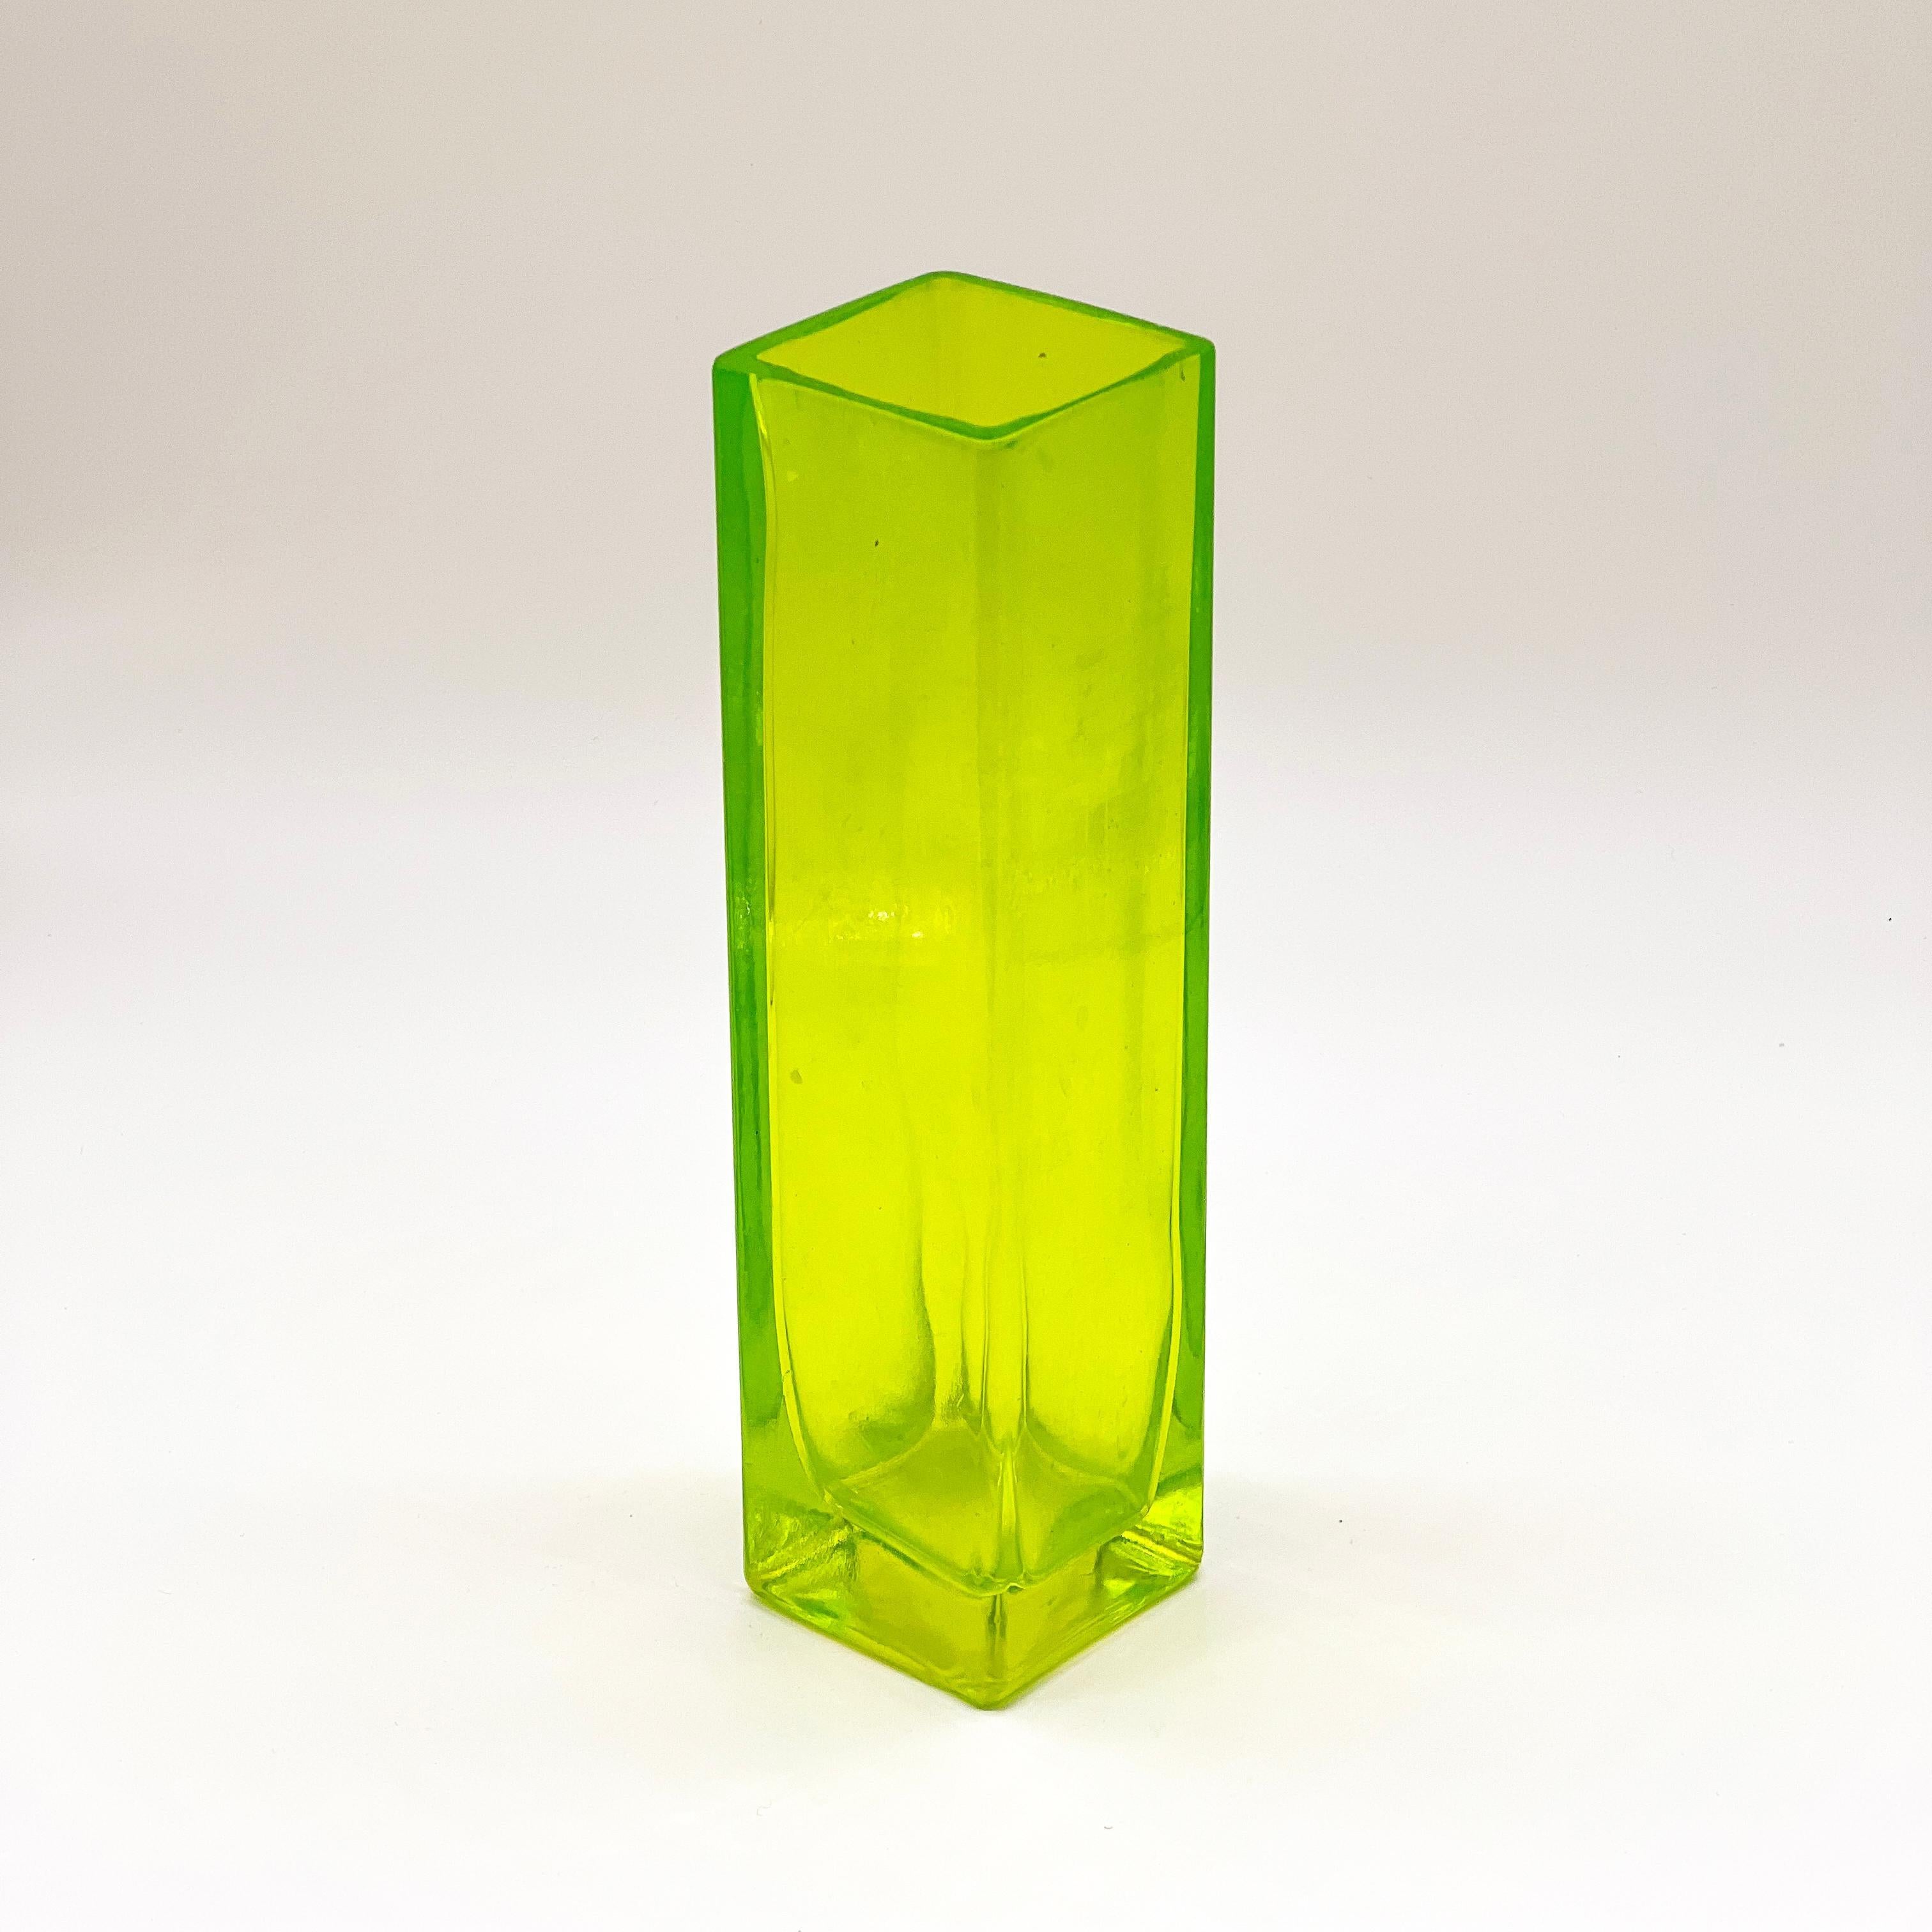 Vintage decorative geometric Murano vase in bright green glass. It has a square base and is around 20cm tall, it's ideal for a little bouquet of flowers but also perfect as an accent piece on tables, coffee tables, bookcases or nightstands.